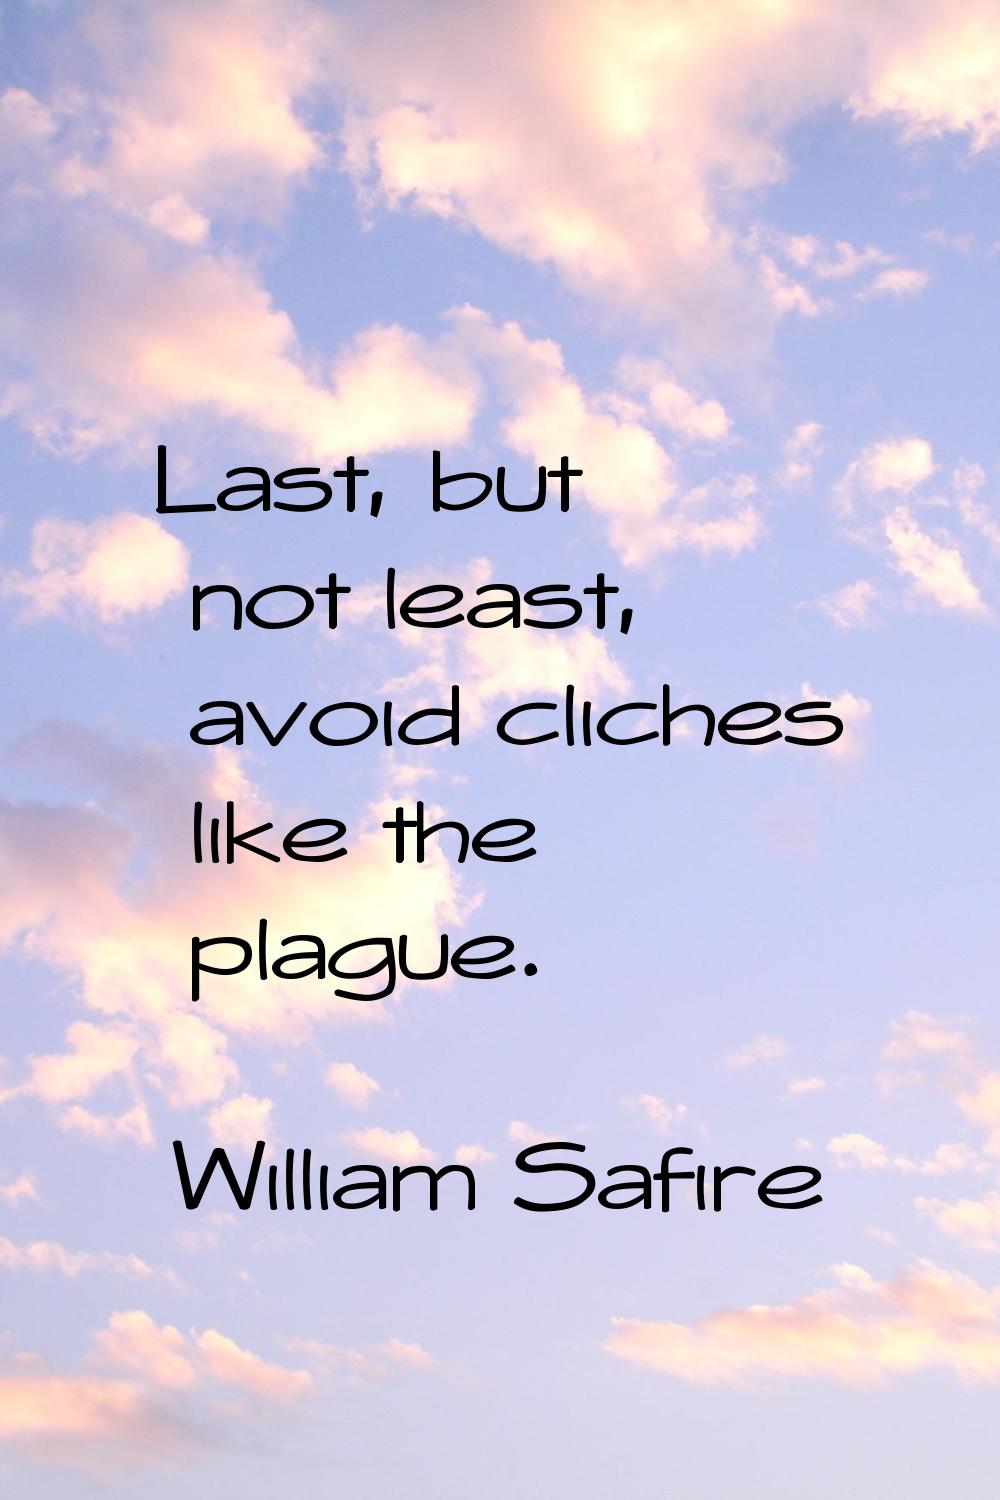 Last, but not least, avoid cliches like the plague.